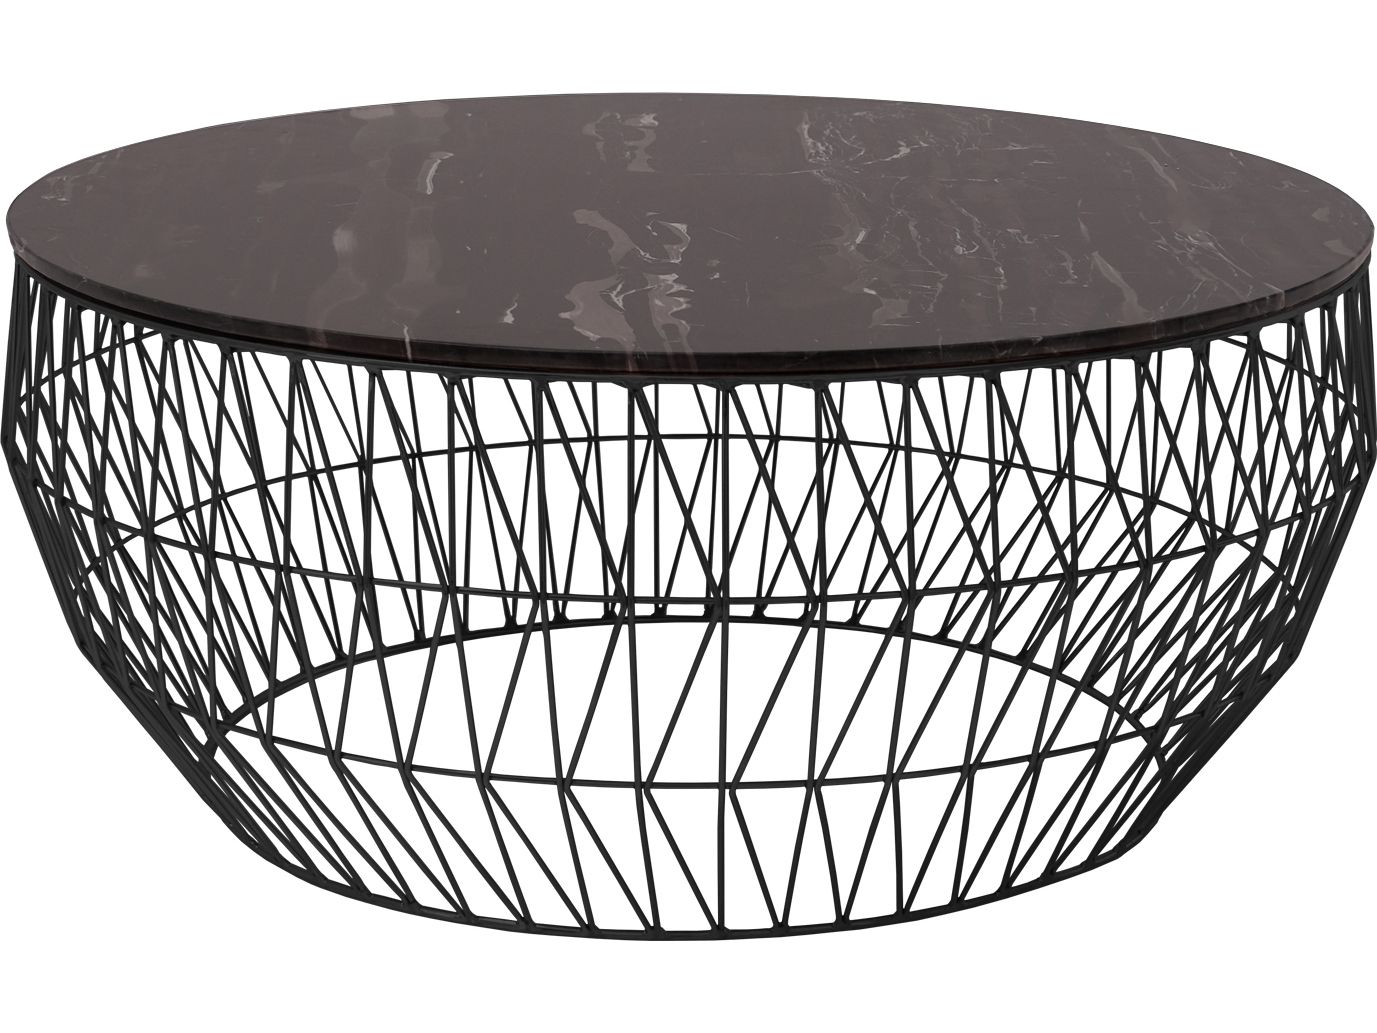 Bend Goods Outdoor Black 36'' Wide Round Coffee Table | 36coffeetableblk Intended For Round Steel Patio Coffee Tables (View 12 of 20)